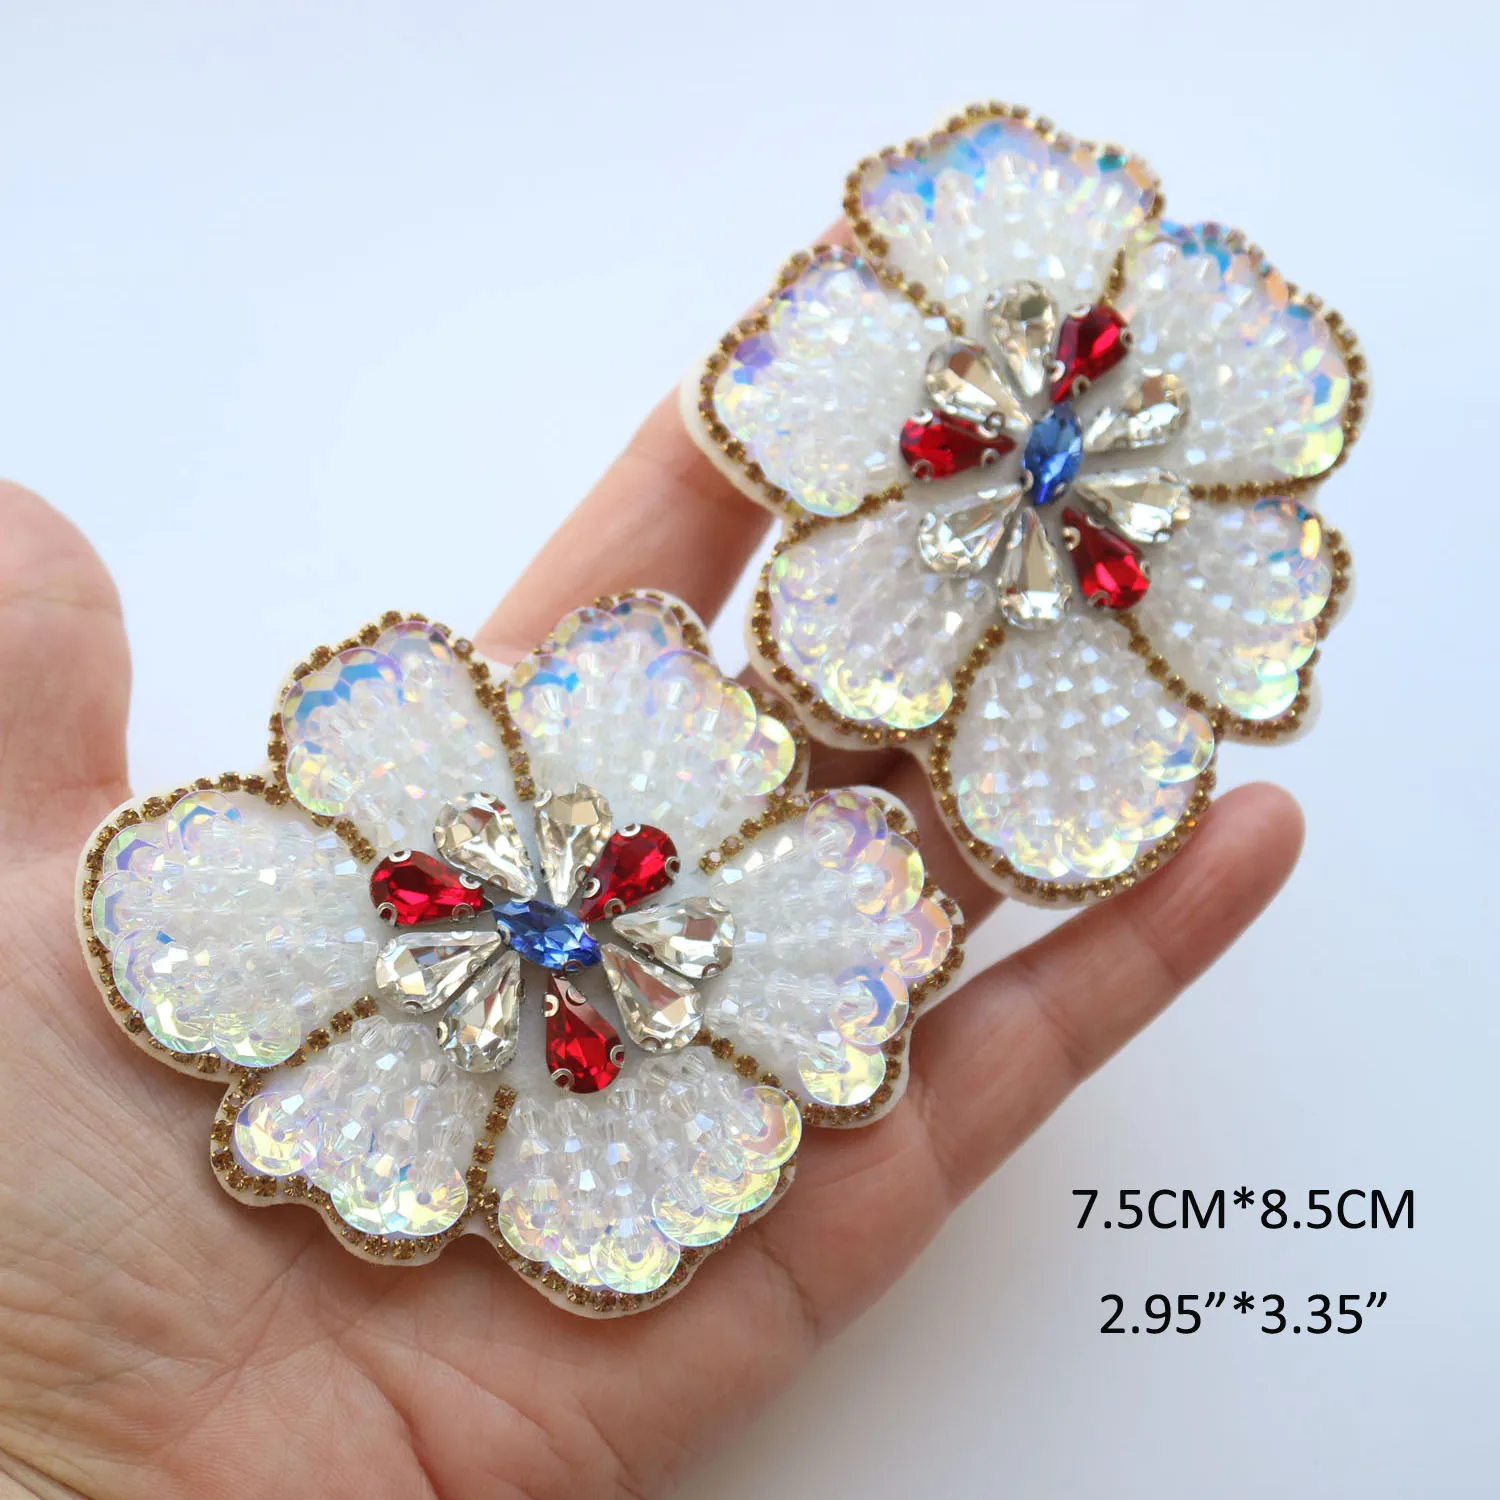 

2pcs/set handmade Flower embroidery patches for clothing 3D leaves embroidered Patches DIY sew on Embroidery appliques parches